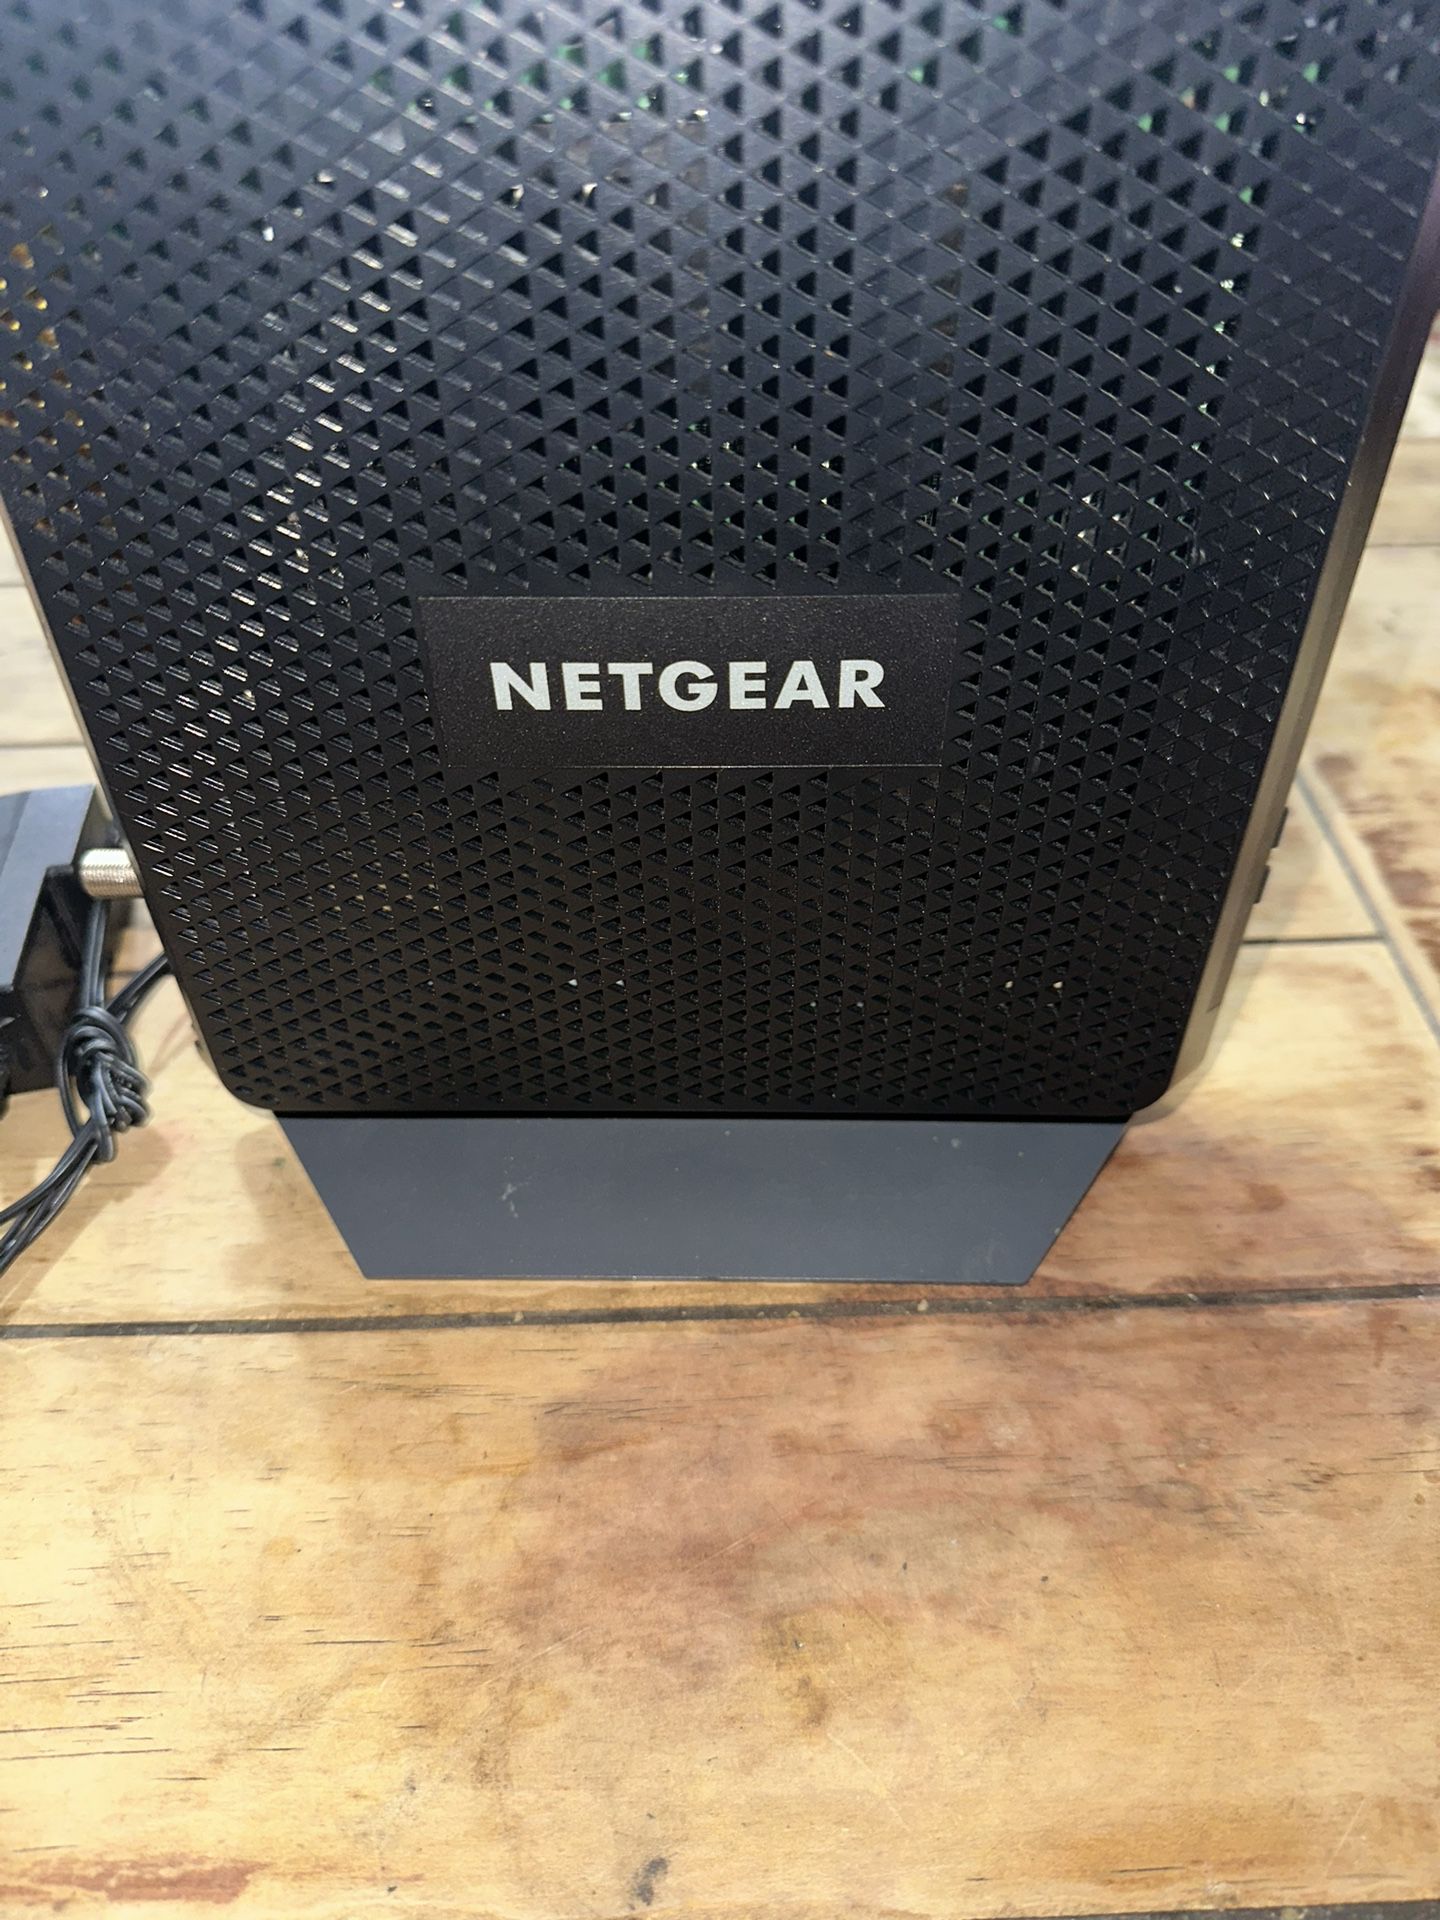 NETGEAR Nighthawk AC1900 C7000V2 Wi-Fi Cable Modem Router With Power Cord